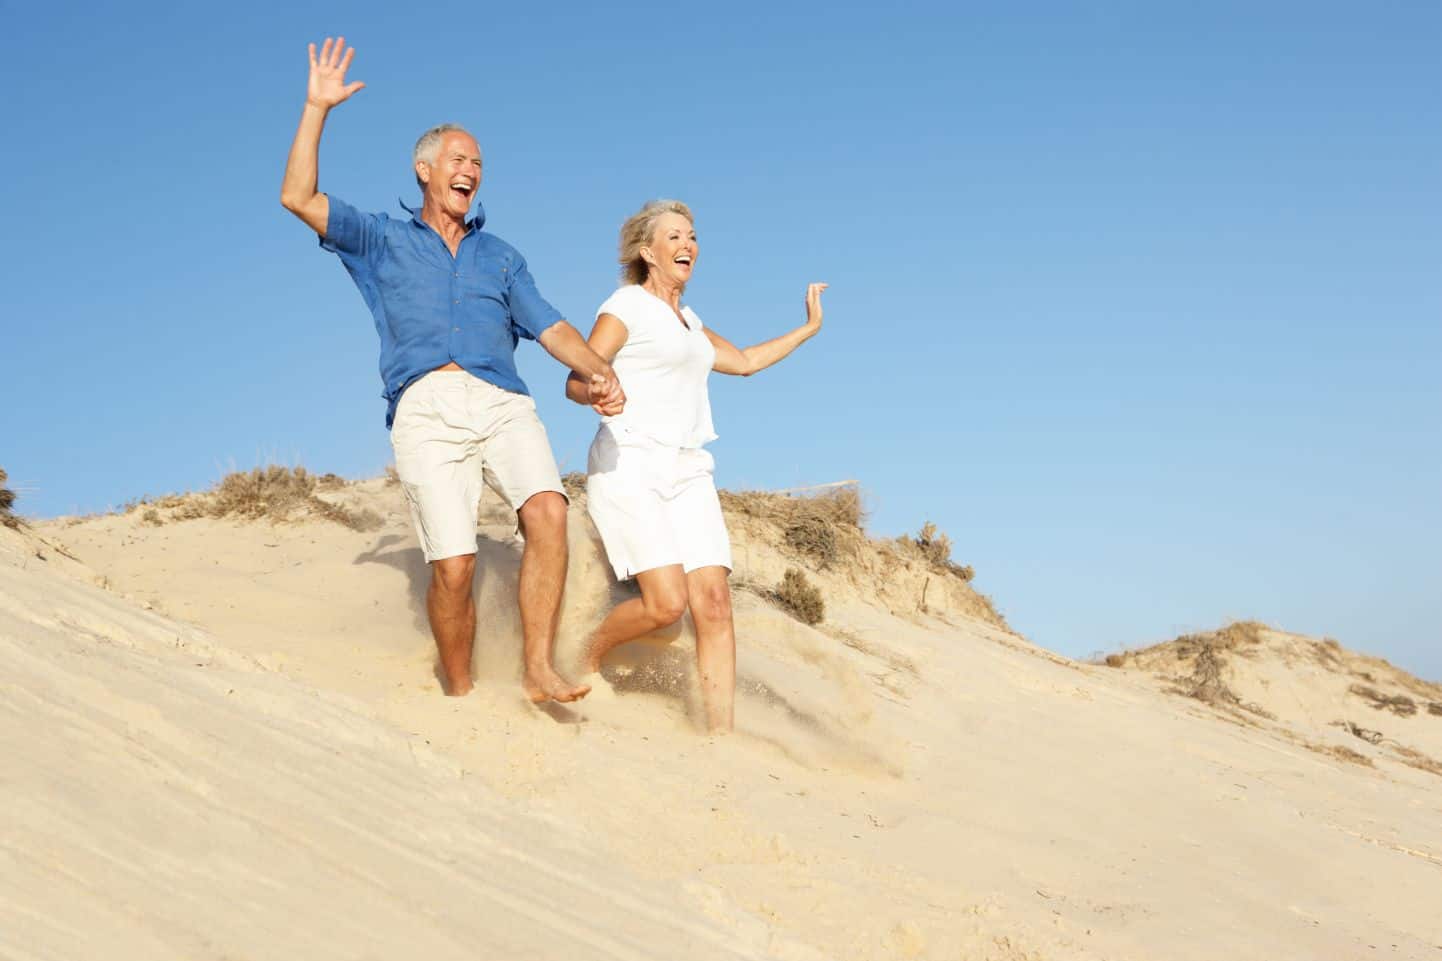 A senior couple experiences old age and independence by running in the sand.